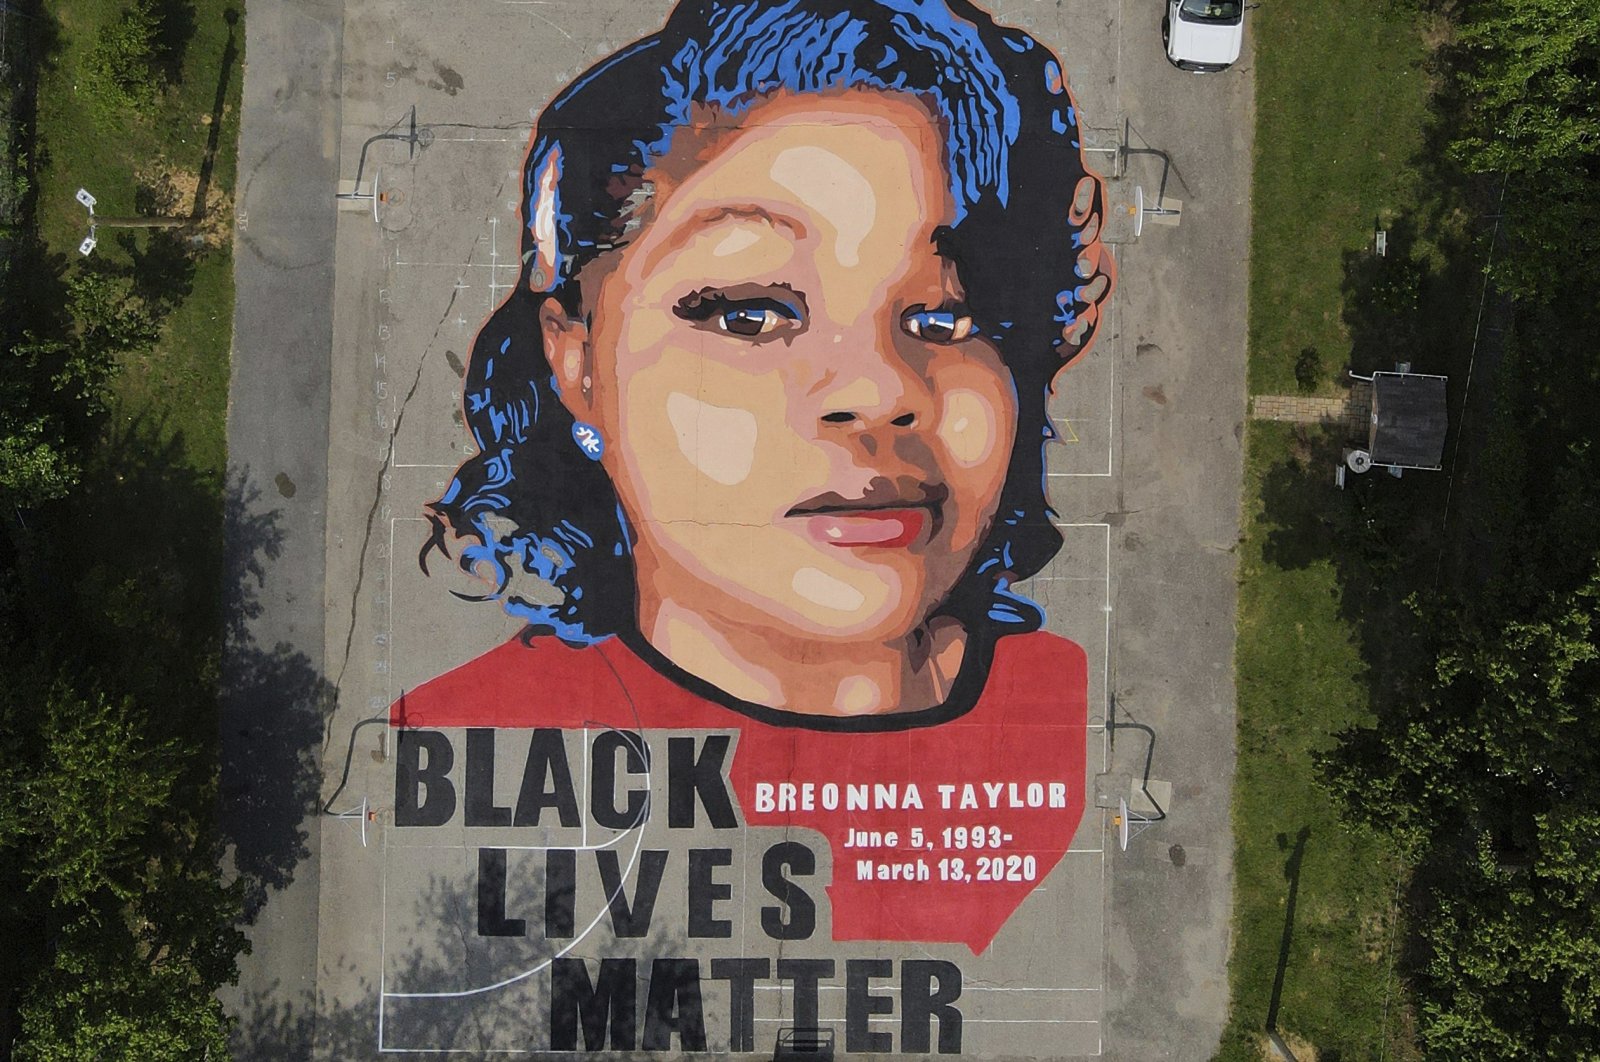 A ground mural depicting a portrait of Breonna Taylor is seen at Chambers Park in Annapolis, Md., U.S., July 6, 2020. (AP Photo)